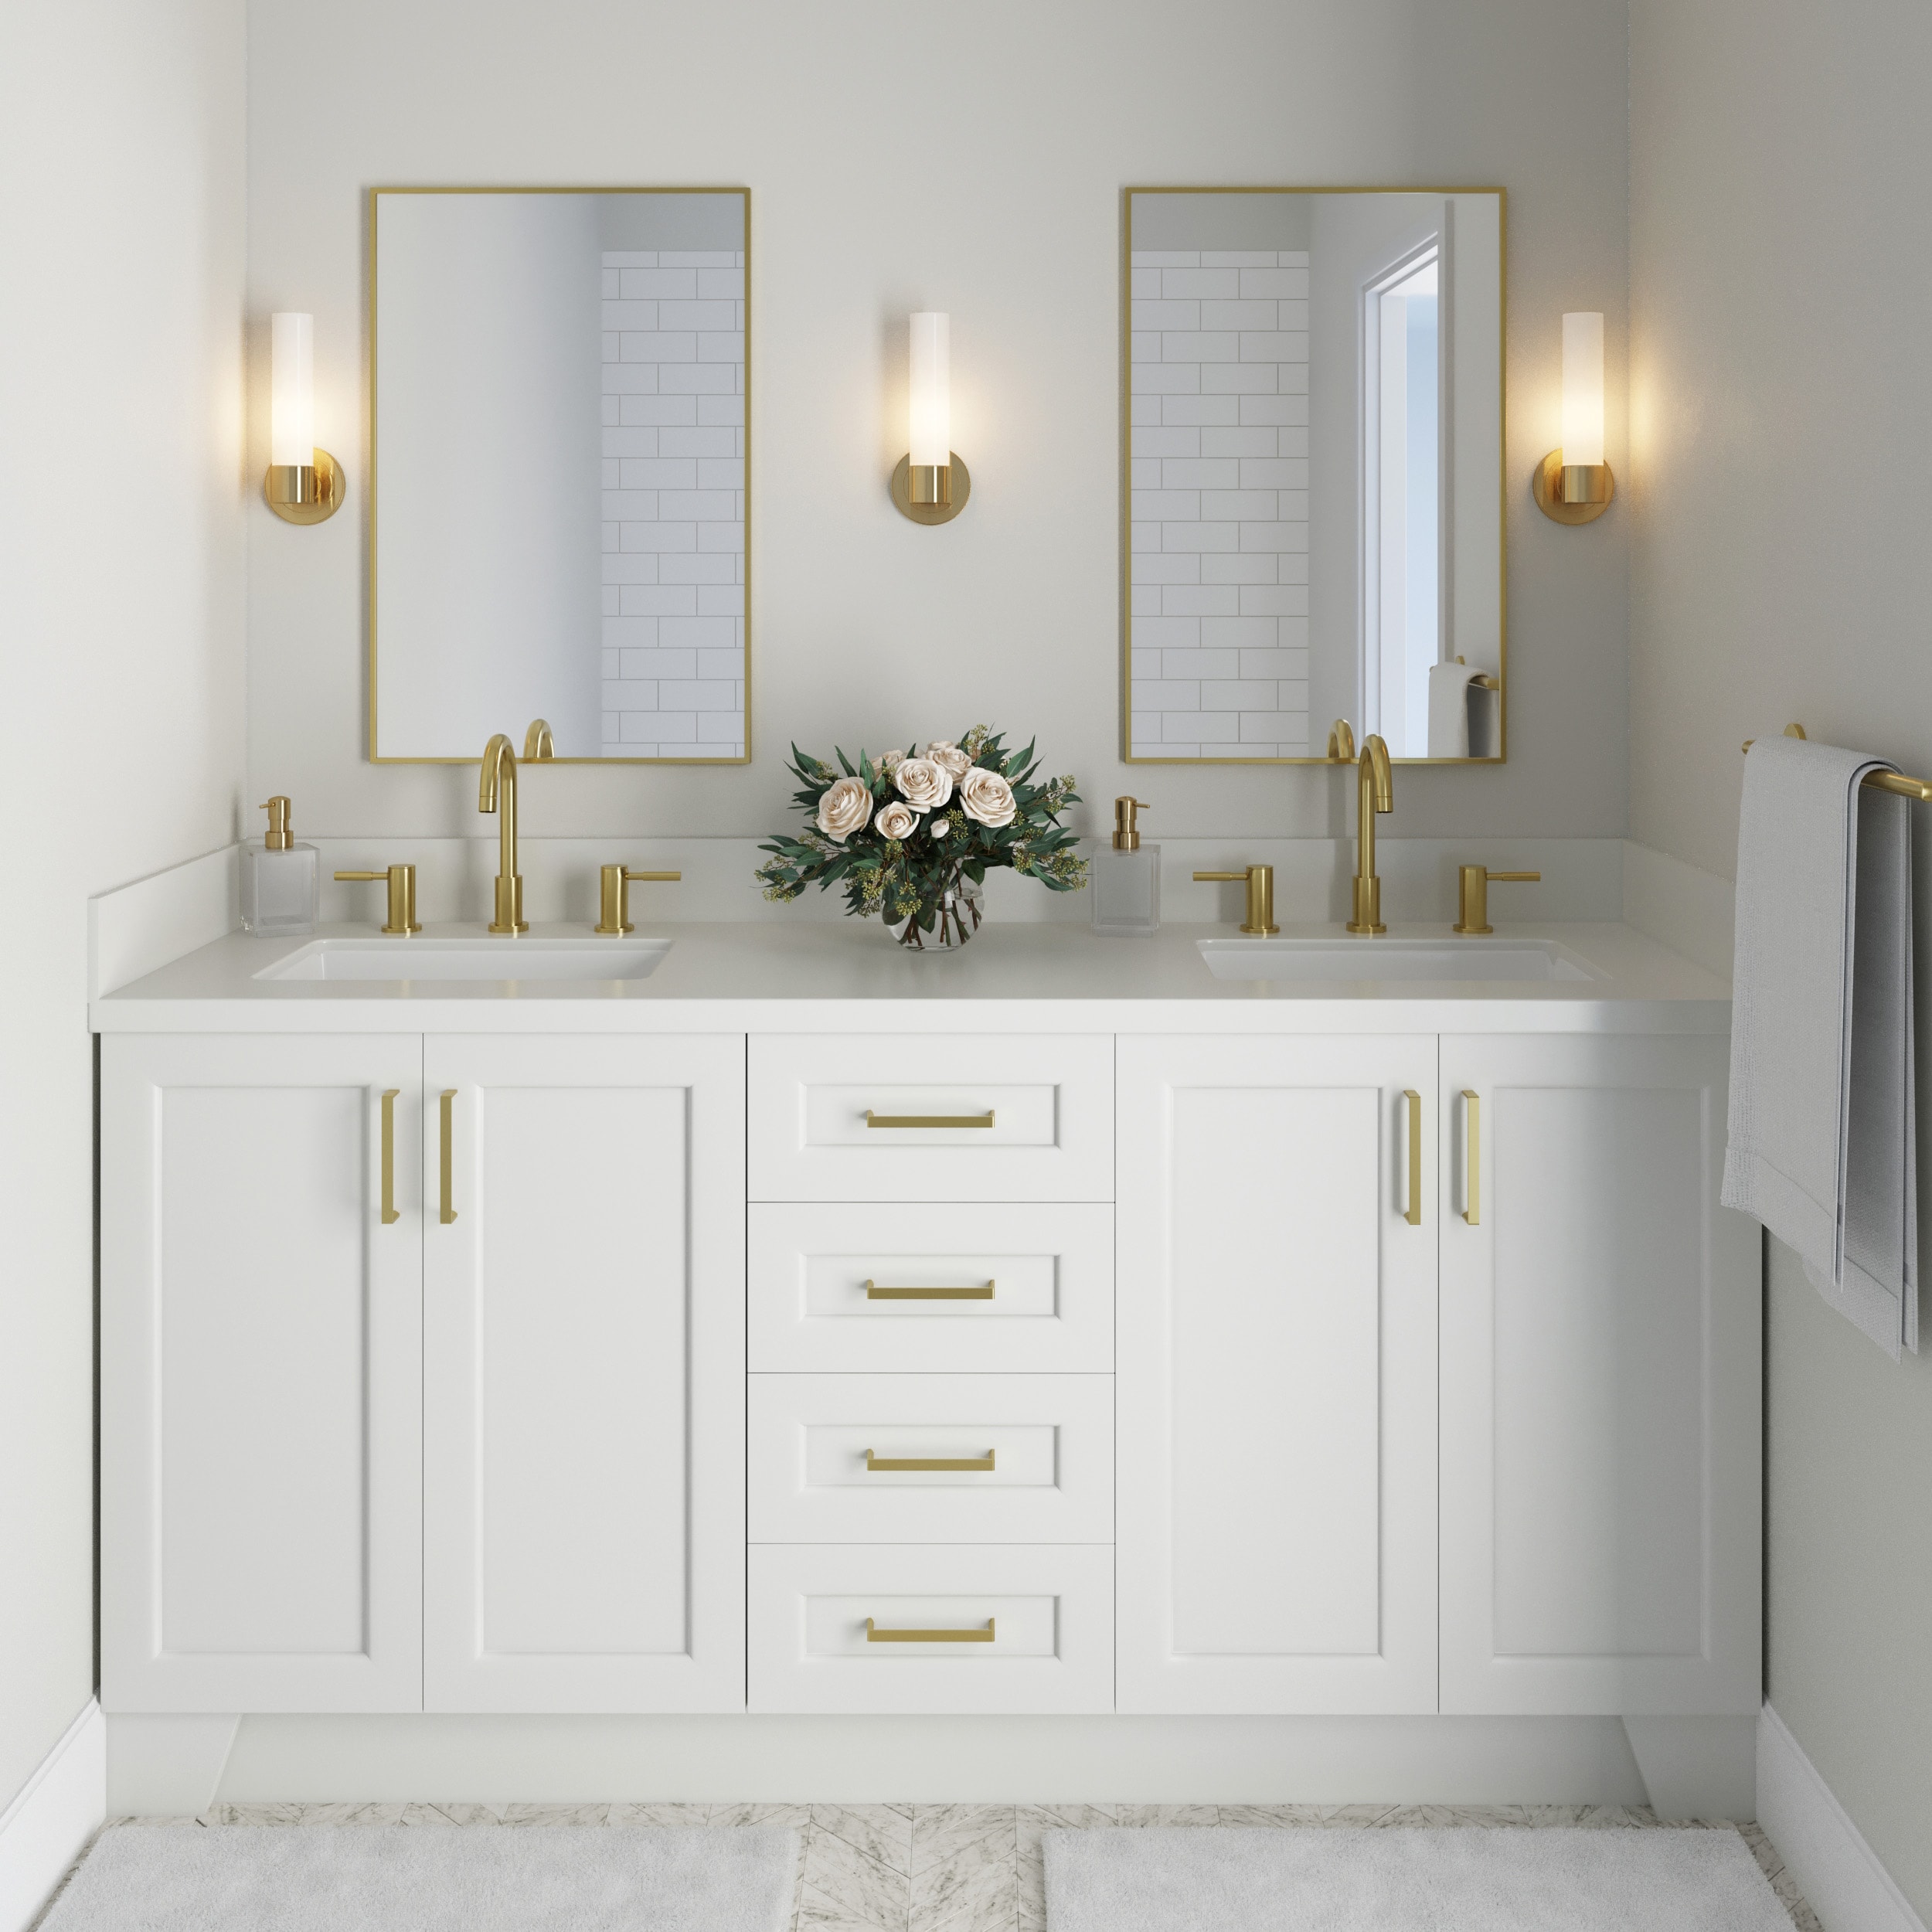 ARIEL Taylor 73-in White Undermount Double Sink Bathroom Vanity with ...